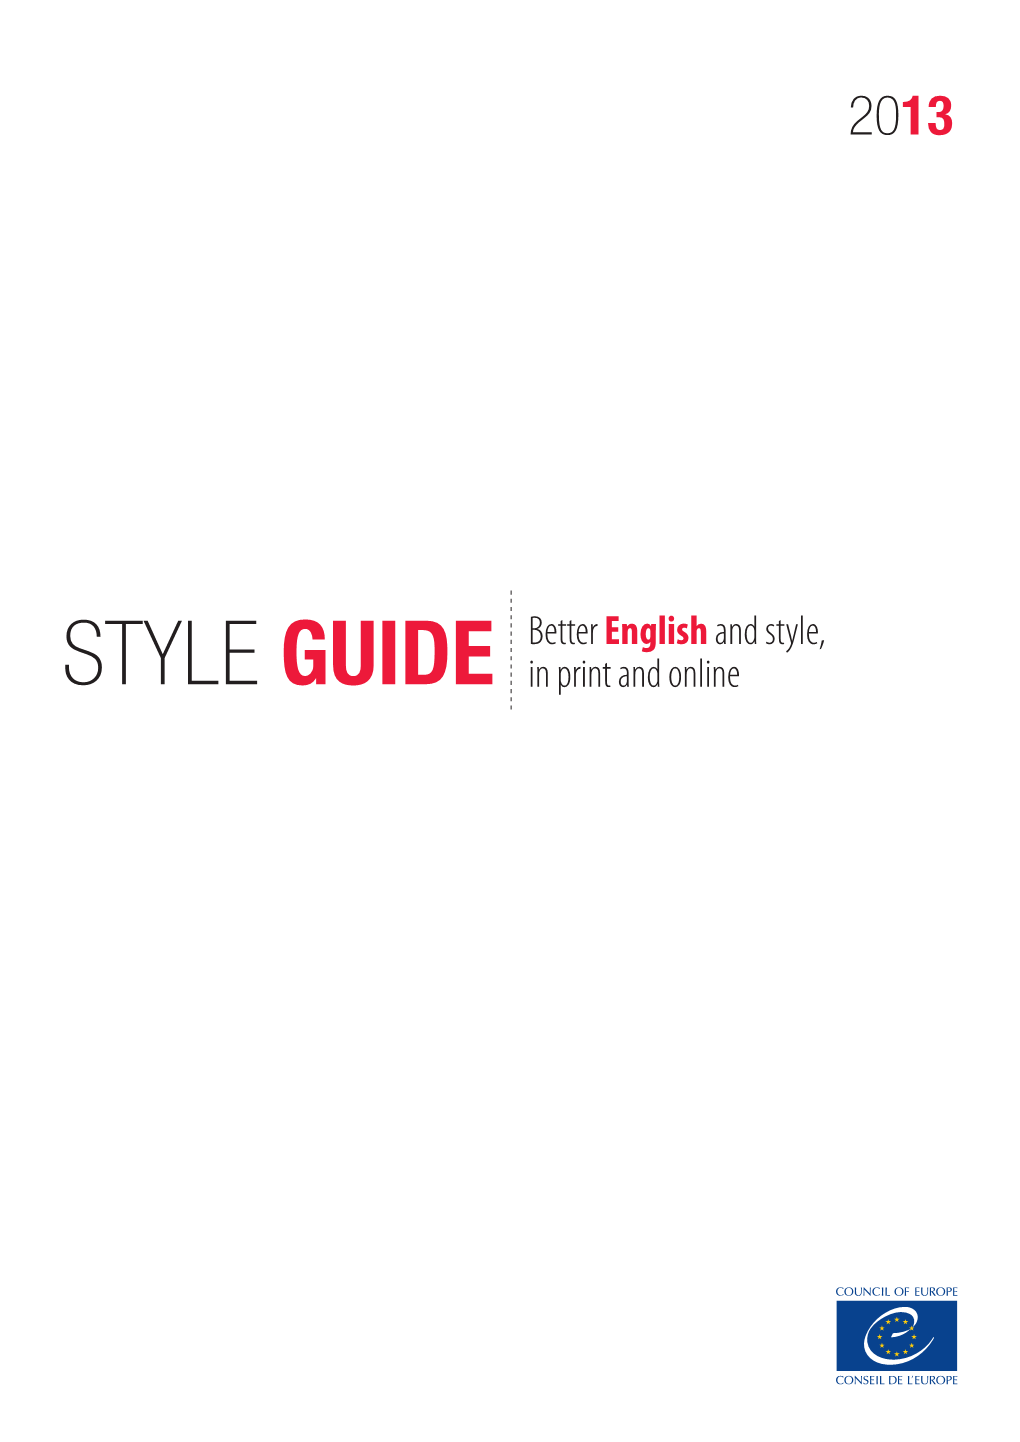 Council of Europe English Style Guide